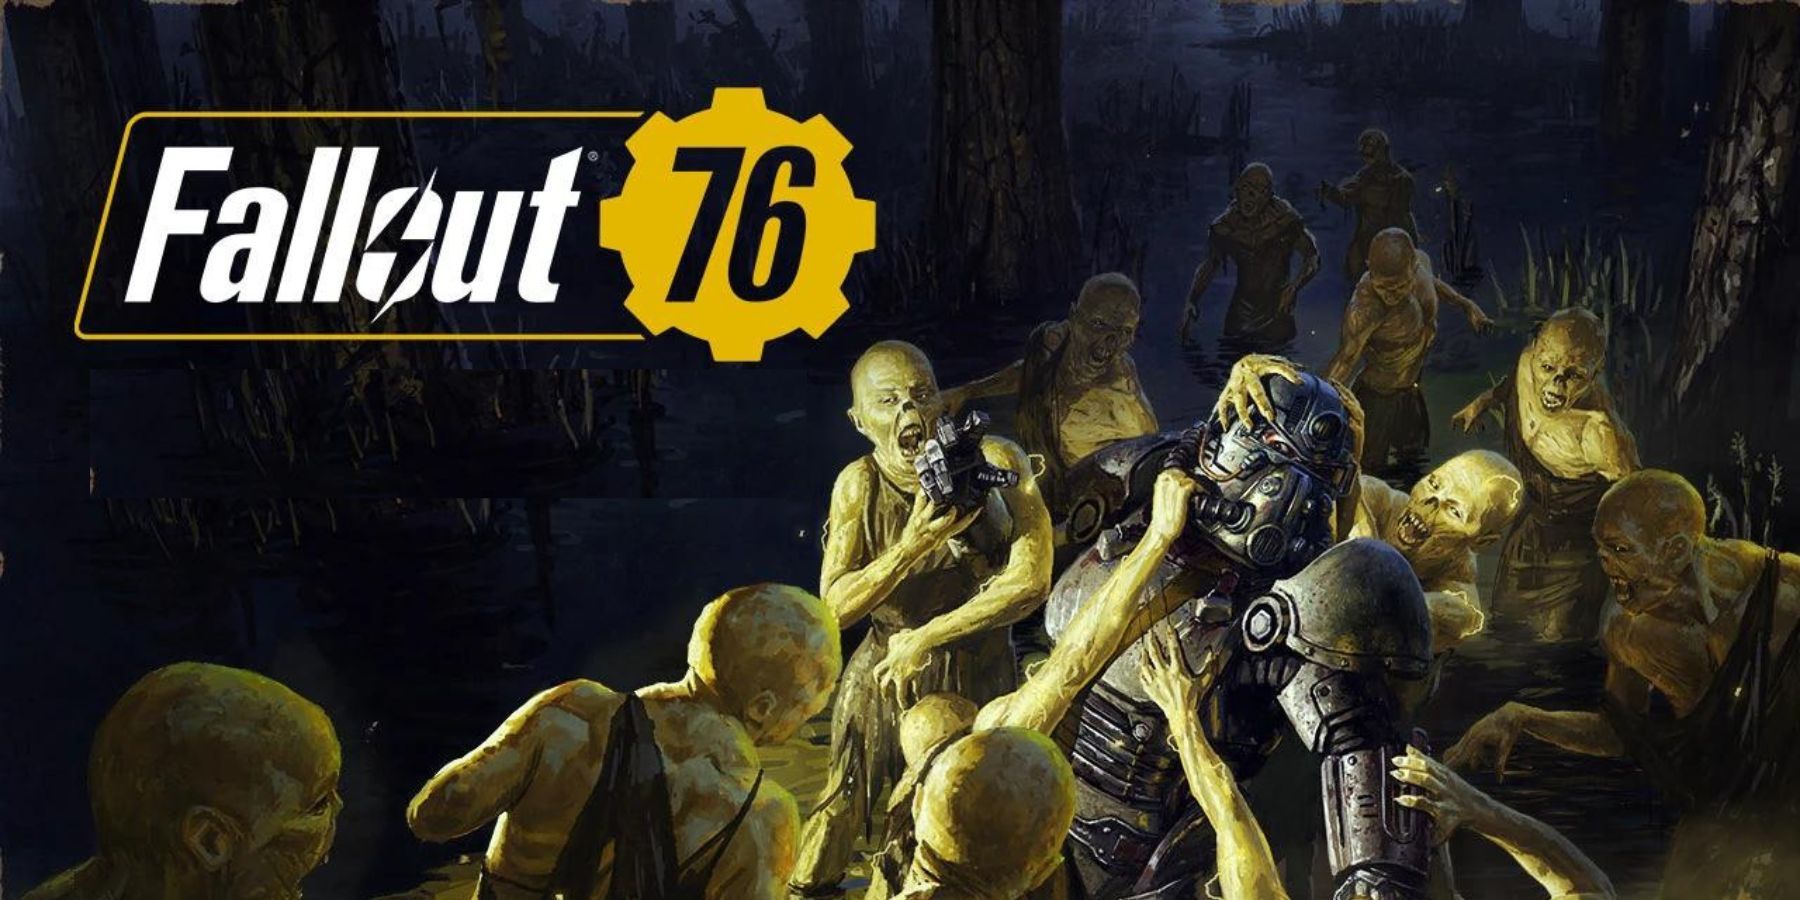 image showing mutants attacking a fallout 76 character.